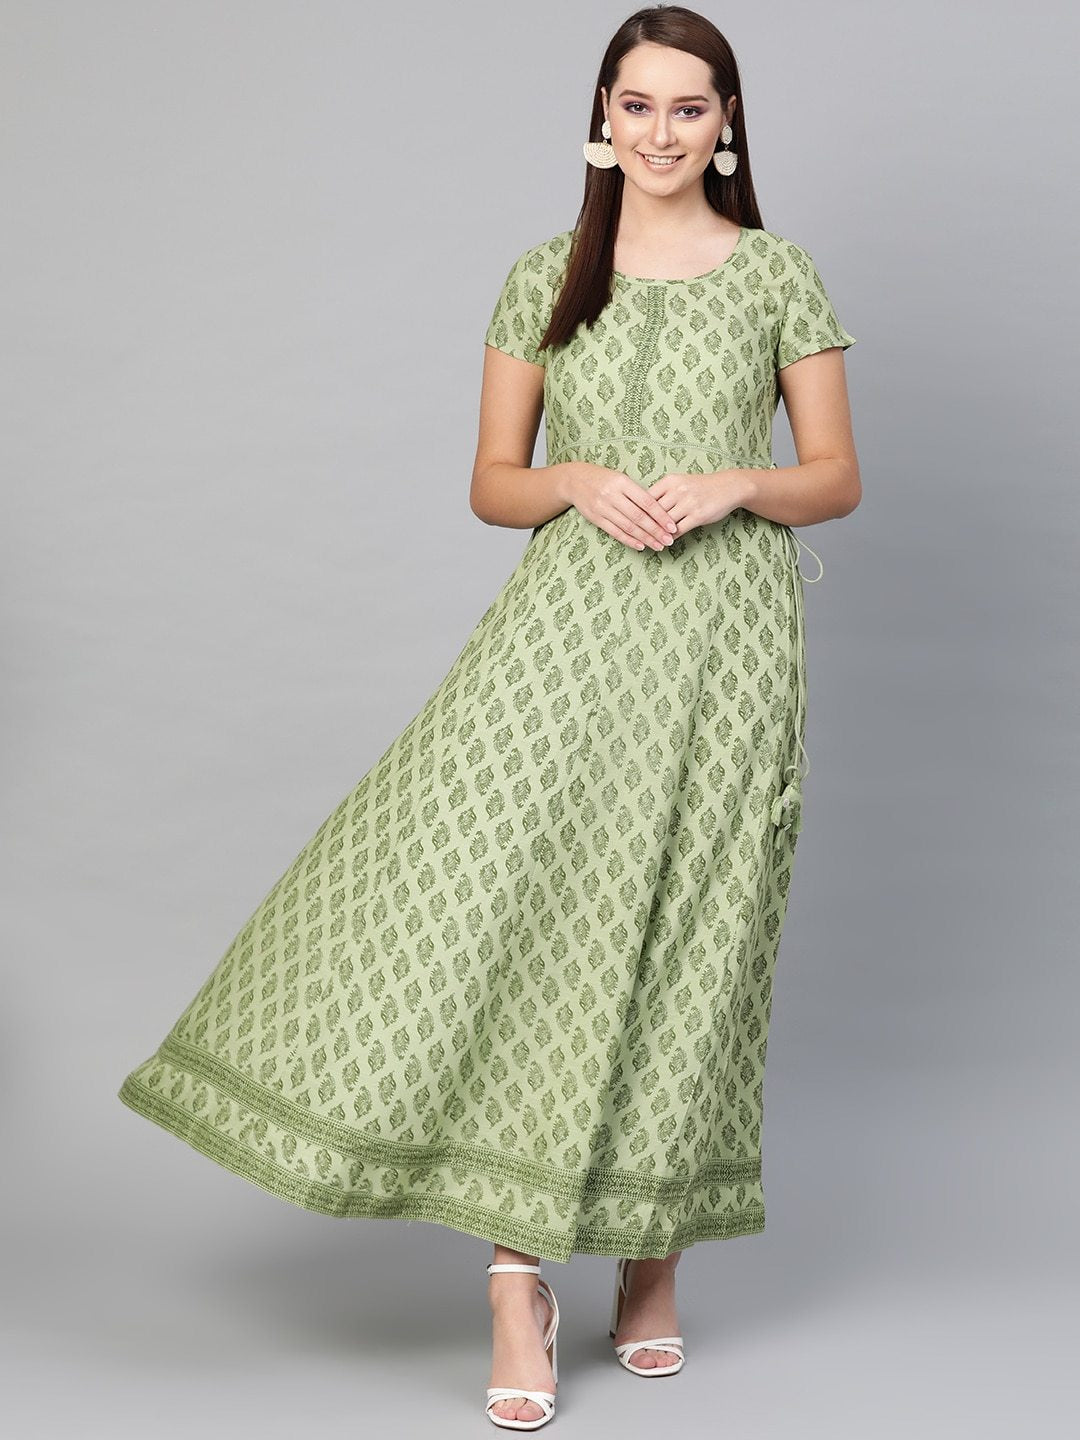 Women's  Green Printed Fit and Flare Dress - AKS